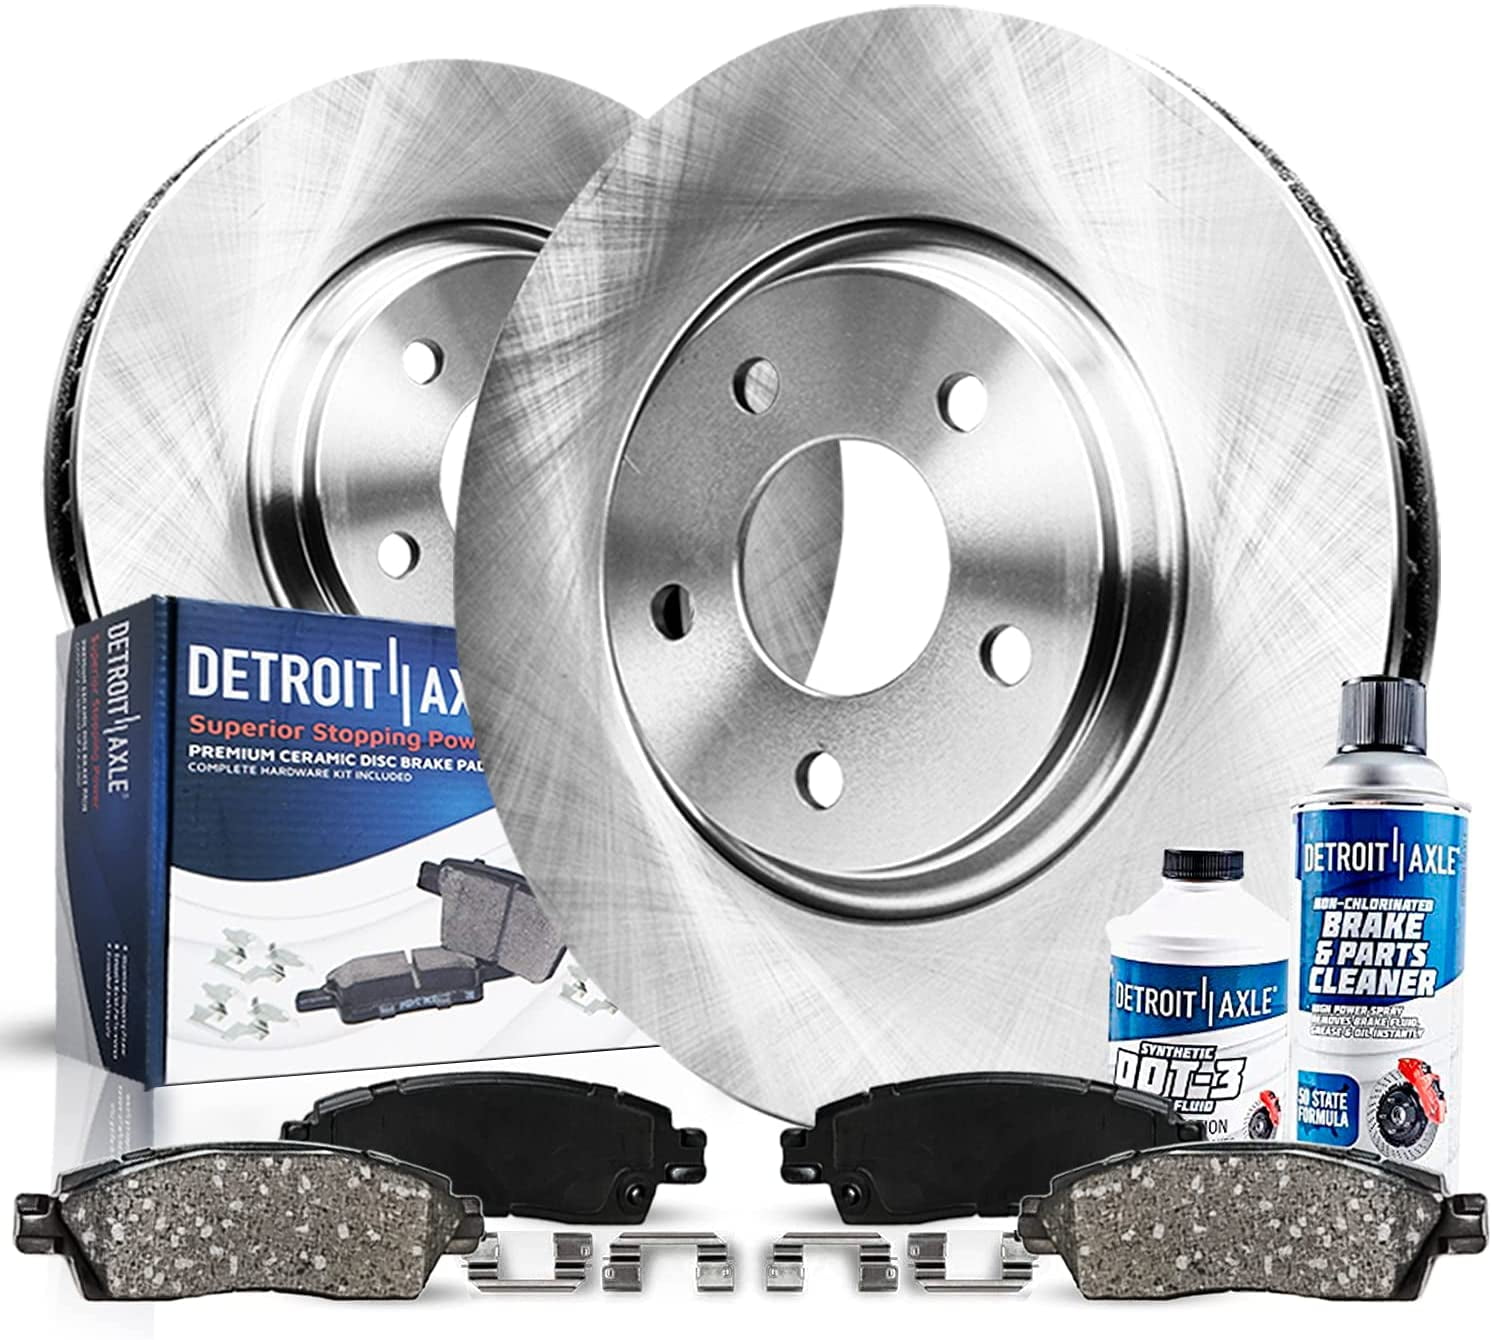 13.94 Detroit Axle 354mm Drilled & Slotted FRONT Brake Rotors for Toyota Sequoia Tundra Limited Platinum 